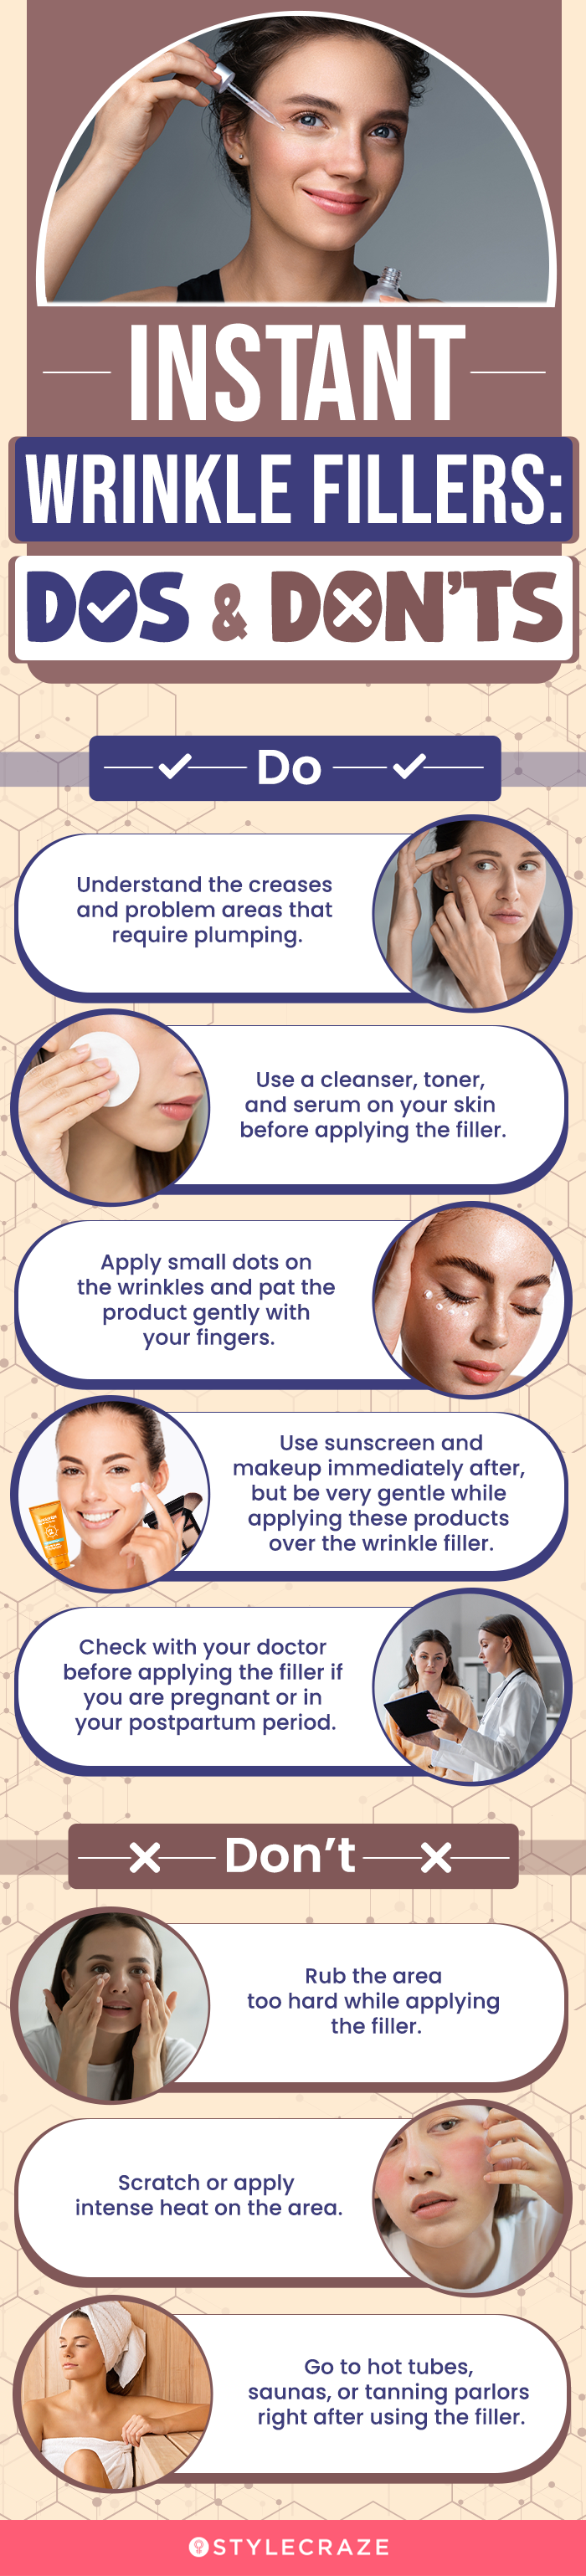 Instant Wrinkle Fillers: Dos & Don’ts (infographic)